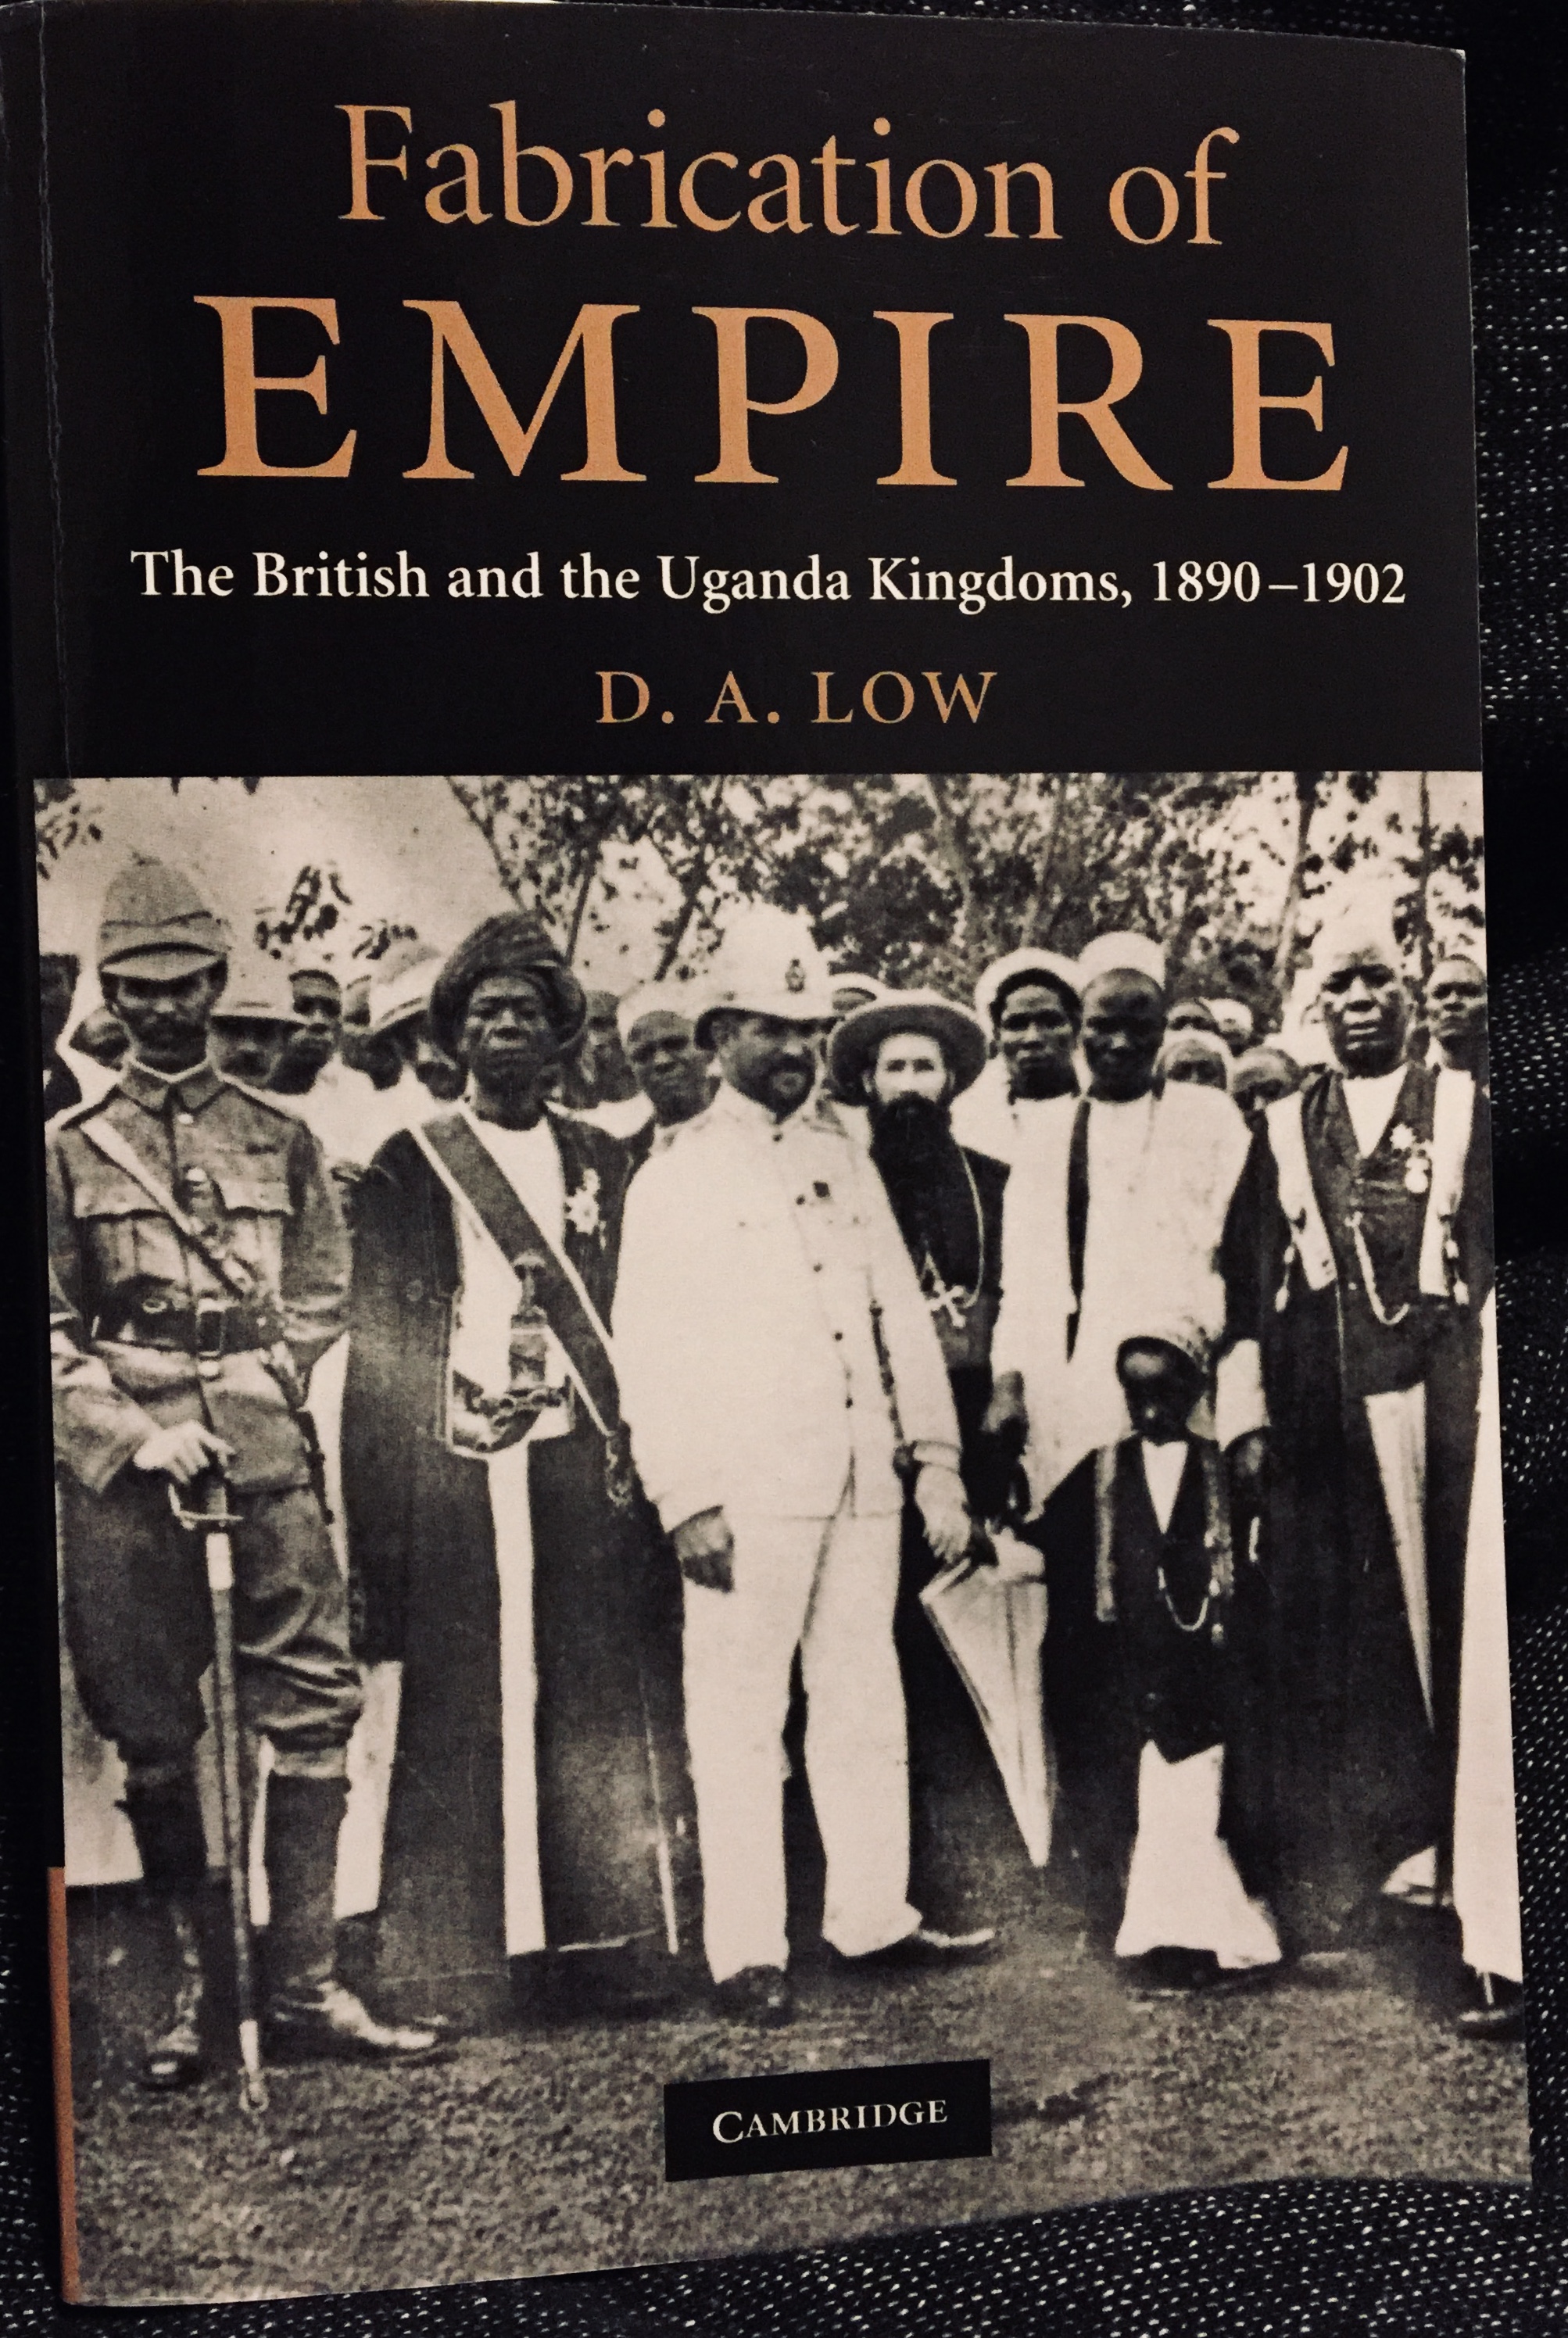 Fabrication of EMPIRE: The British and the Uganda Kingdoms, 1890-1902 – By D. A. Low